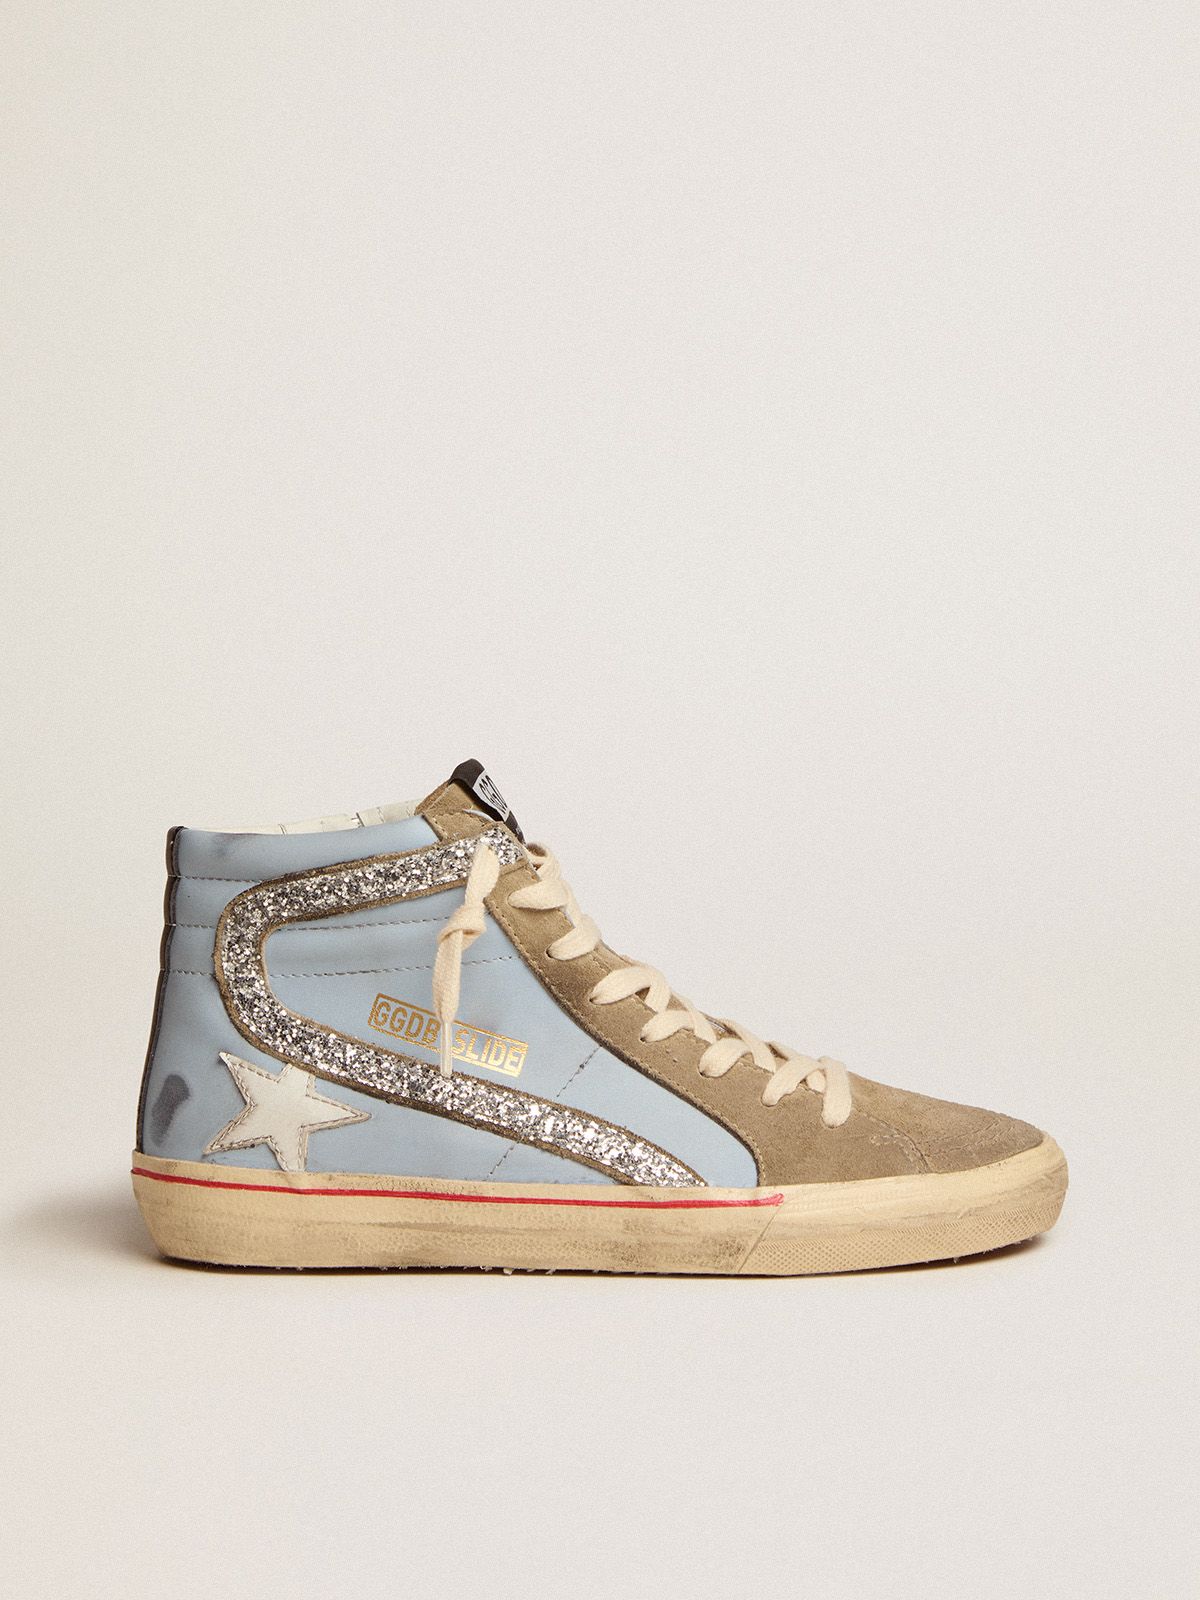 golden goose leather Slide tongue sneakers in glitter and flash silver with powder-blue suede dove-gray